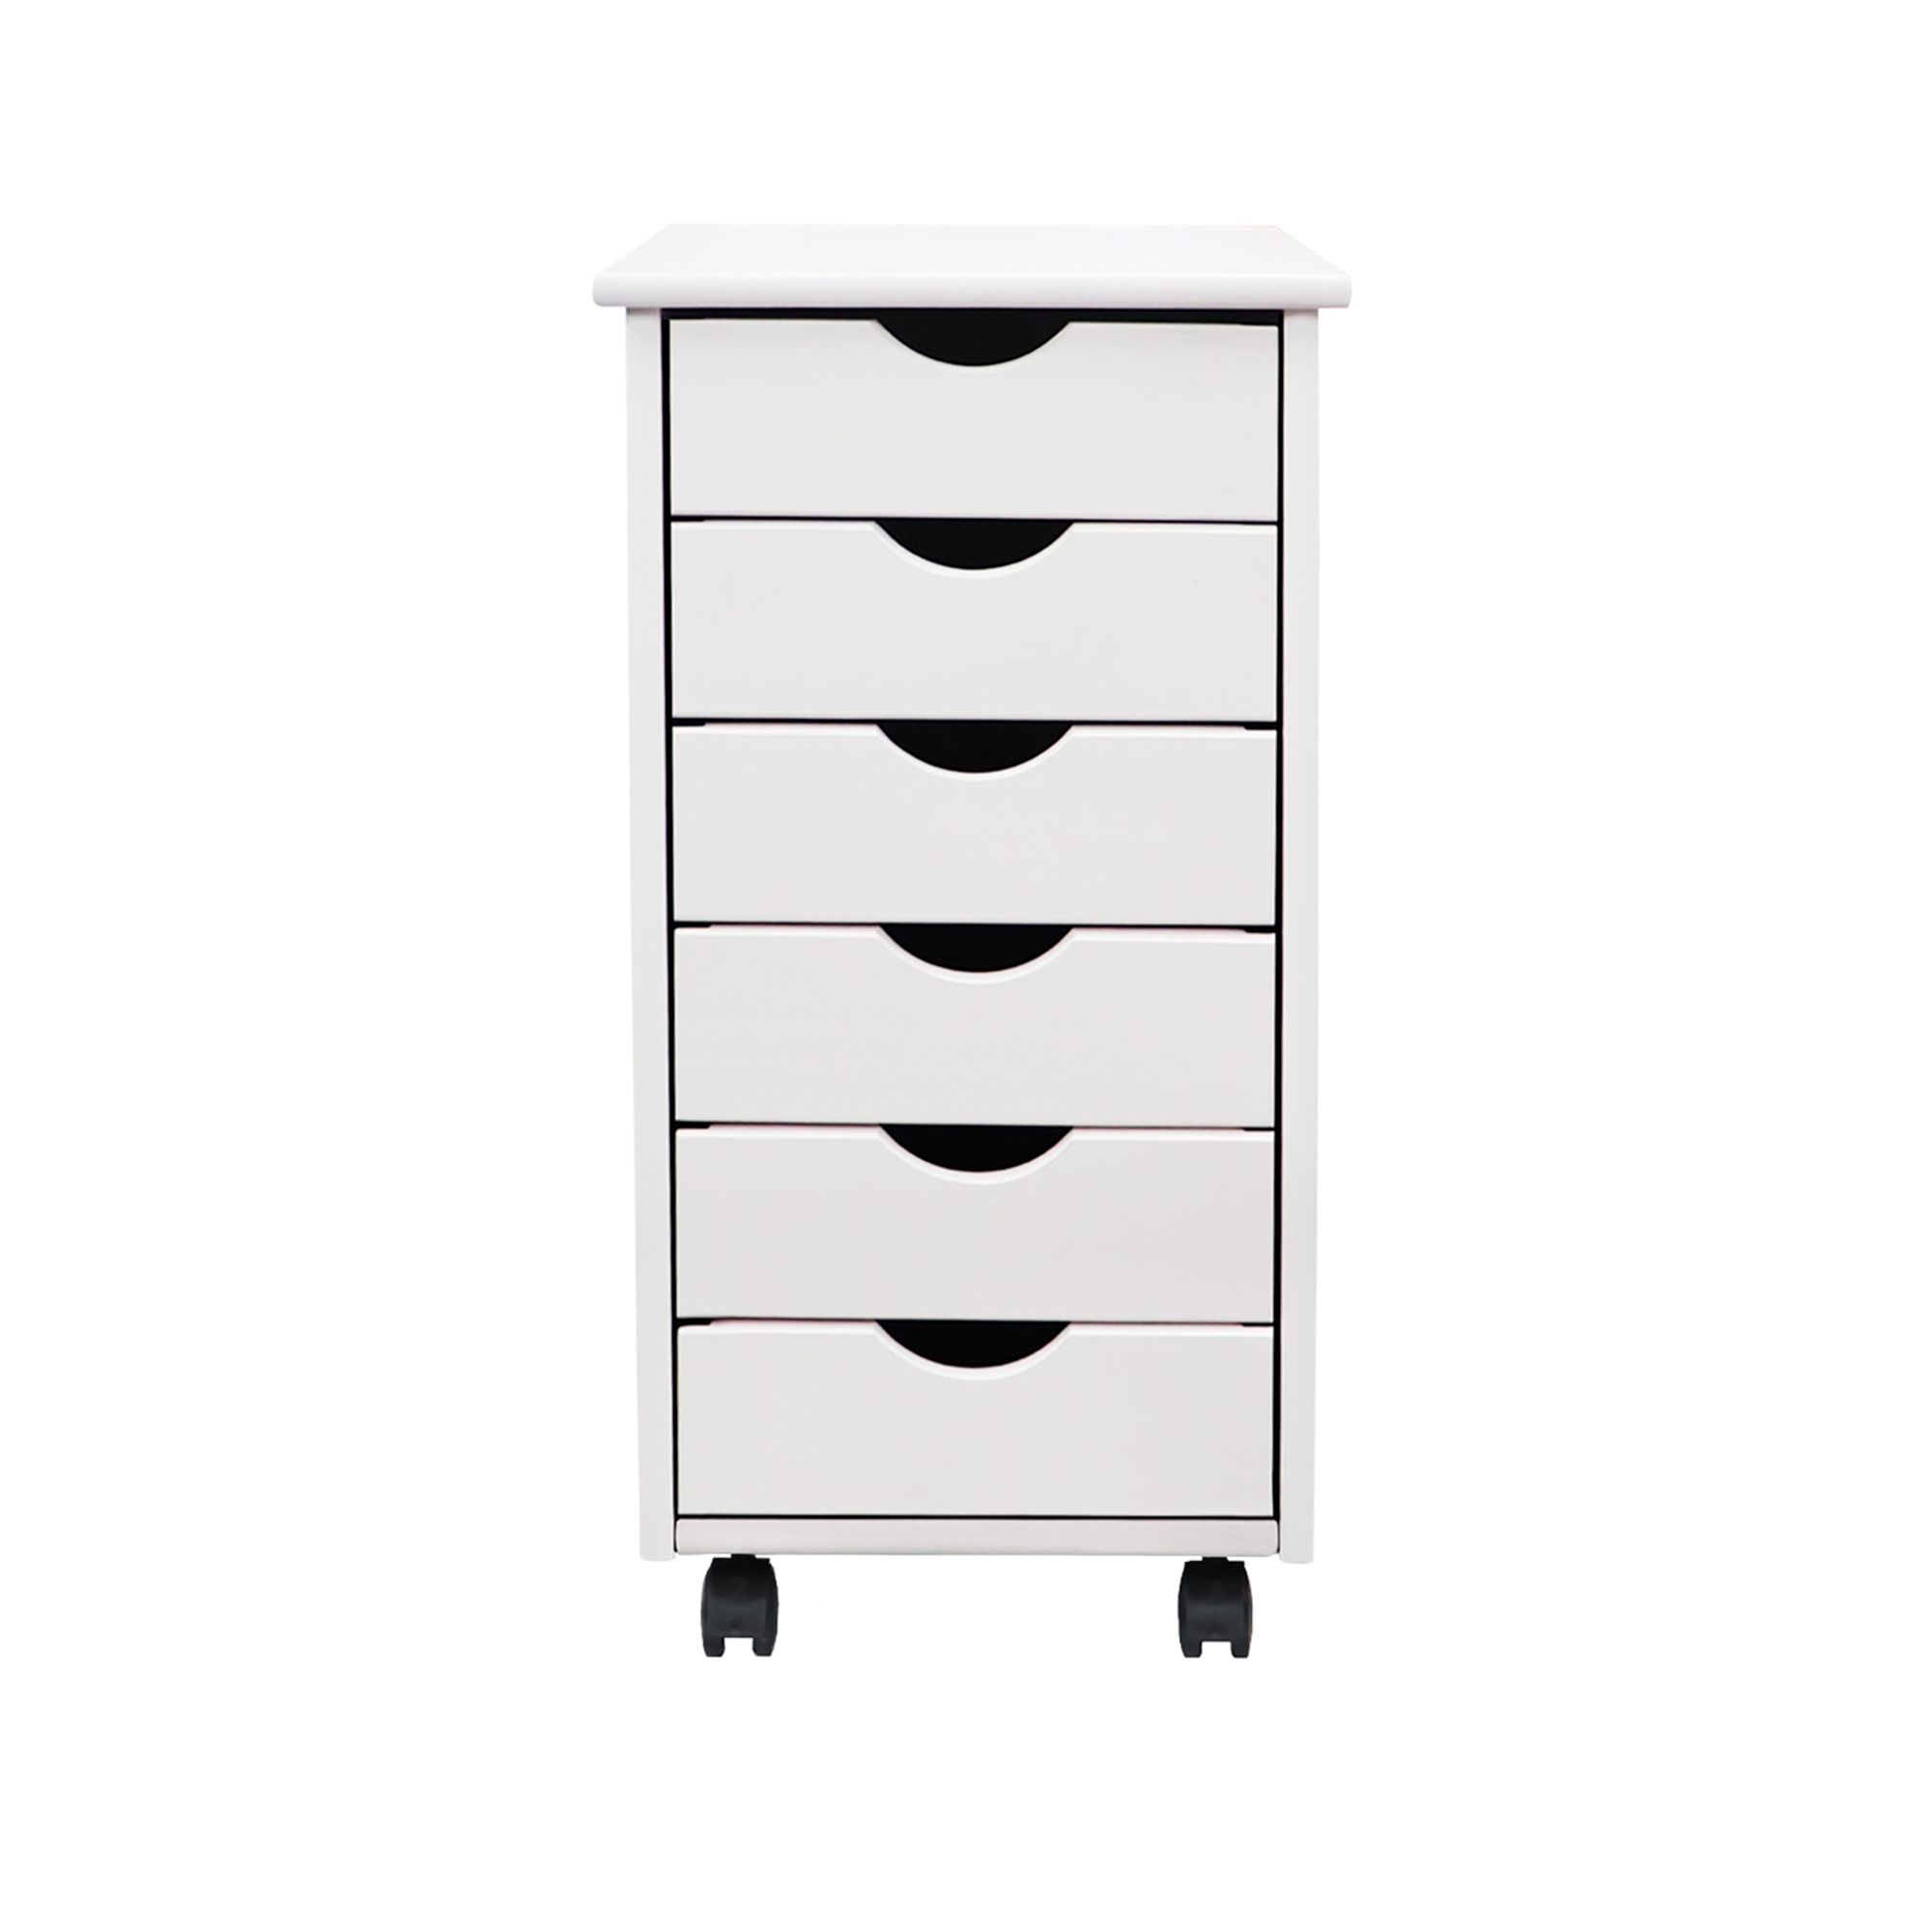 Adeptus Original Roll Cart, Solid Wood, 6 Drawer Roll Cart, White  (13.4" L x 15.4" W x 25.4" H) - image 5 of 9